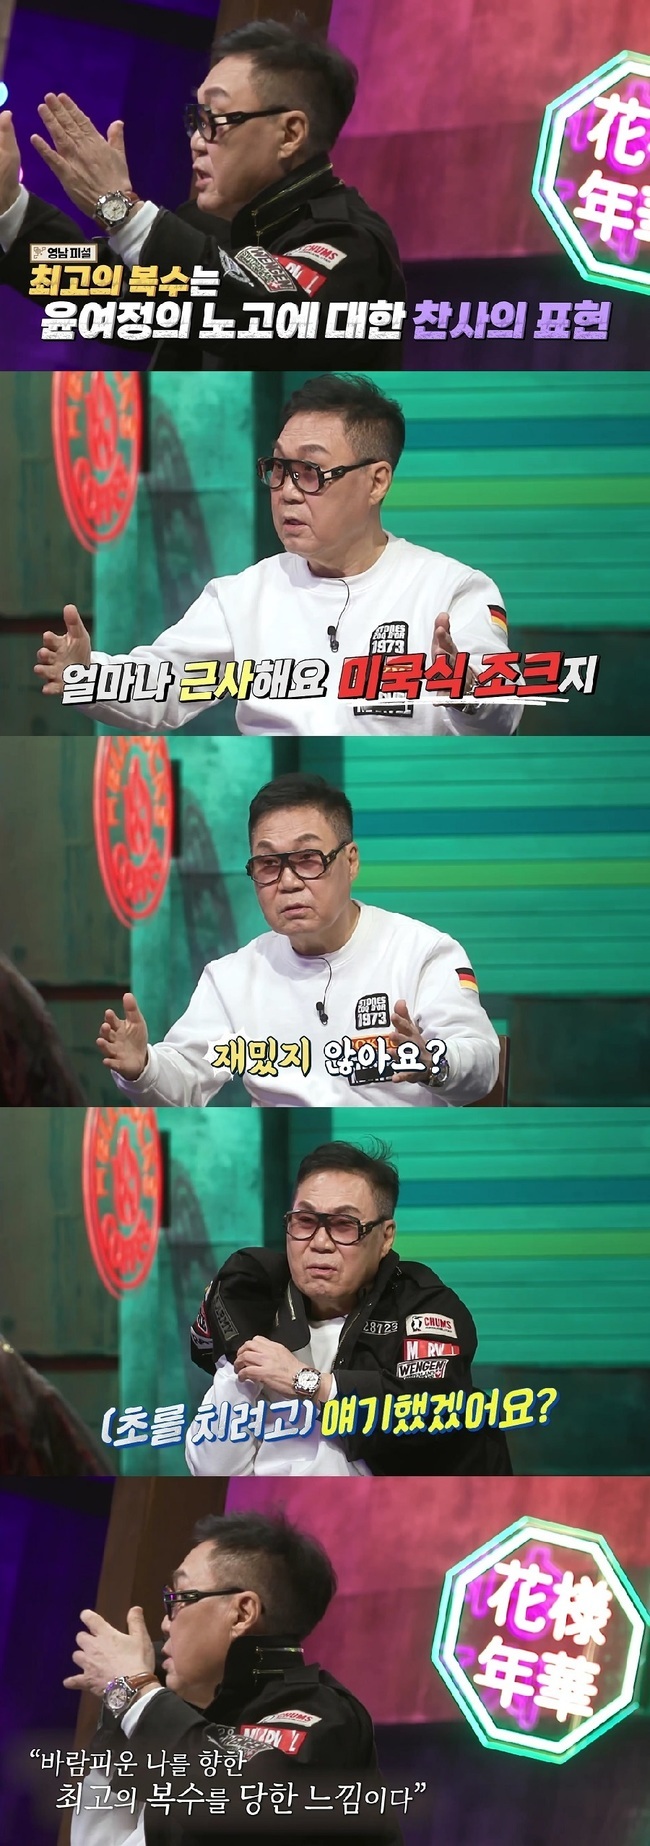 Cho Young-nam, a singer and painter who had been controversial over the remarks of Best Revenge, said, It was an expression of praise for the hard work of the former actor Youn Yuh-jung.In MBN a match with god, which will be broadcasted on January 16, Cho Young-nam will be the first guest to talk about the unknown story.It is expected to draw an extraordinary talk scene that is as it is, digging into the life history of Cho Young-nam, 50 years of his old life, as well as the truth hidden in numerous controversies surrounding him, such as the big controversy, the fake wedding, the death of Cho Young-nam in 2009, and the best revenge.The third appeal to his reincarnation was the best revenge. Cho Young-nam told about an anecdote that was controversial due to his remarks about his ex-wife, actor Youn Yuh-jung.At that time, Youn Yuh-jung won the Best Supporting Actress Award at the Academy Awards for the movie Minari, and in an interview with a media, he said, It is the best shot, revenge for a cheating man.The best revenge, he said.In response, Cho Young-nam asked, It was an American joke. How wonderful is it? Is not it funny? And his unexpected excuse was embarrassed by 3MC Do.Cho Young-nam also said, I did not think it could be controversial at all. It was a tribute to the hard work of Youn Yuh-jung.I dont think I would have said that to make a candle, which is the first Korean actor to win the award and a national pride.And I felt like I had the best revenge myself. I heard the news through Yi Jang-hui, a motive alumni and friend of Youn Yuh-jung, and I felt comfortable when I was often exposed through the media.But about her ex-husband, Youn Yuh-jung, tells Yi Jang-hui, If you talk about Cho Young-nam, you will not meet.As for the cold reaction of the public, which was different from the intention, he said, I have been suffering from a huge evil for a while.Ive been cursed and even the planned exhibition of paintings has been canceled, he explained with a sweat.